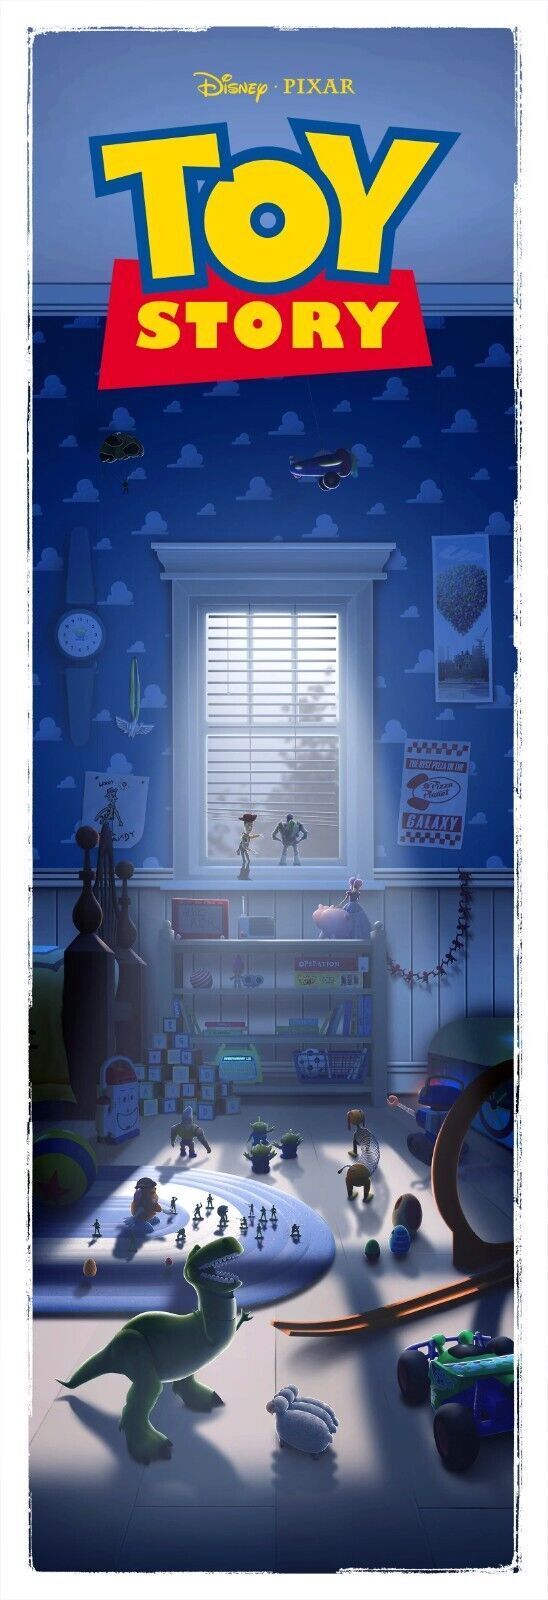 Toy Story Night Variant by Ben Harman, 36" x 12" Fine Art Giclee